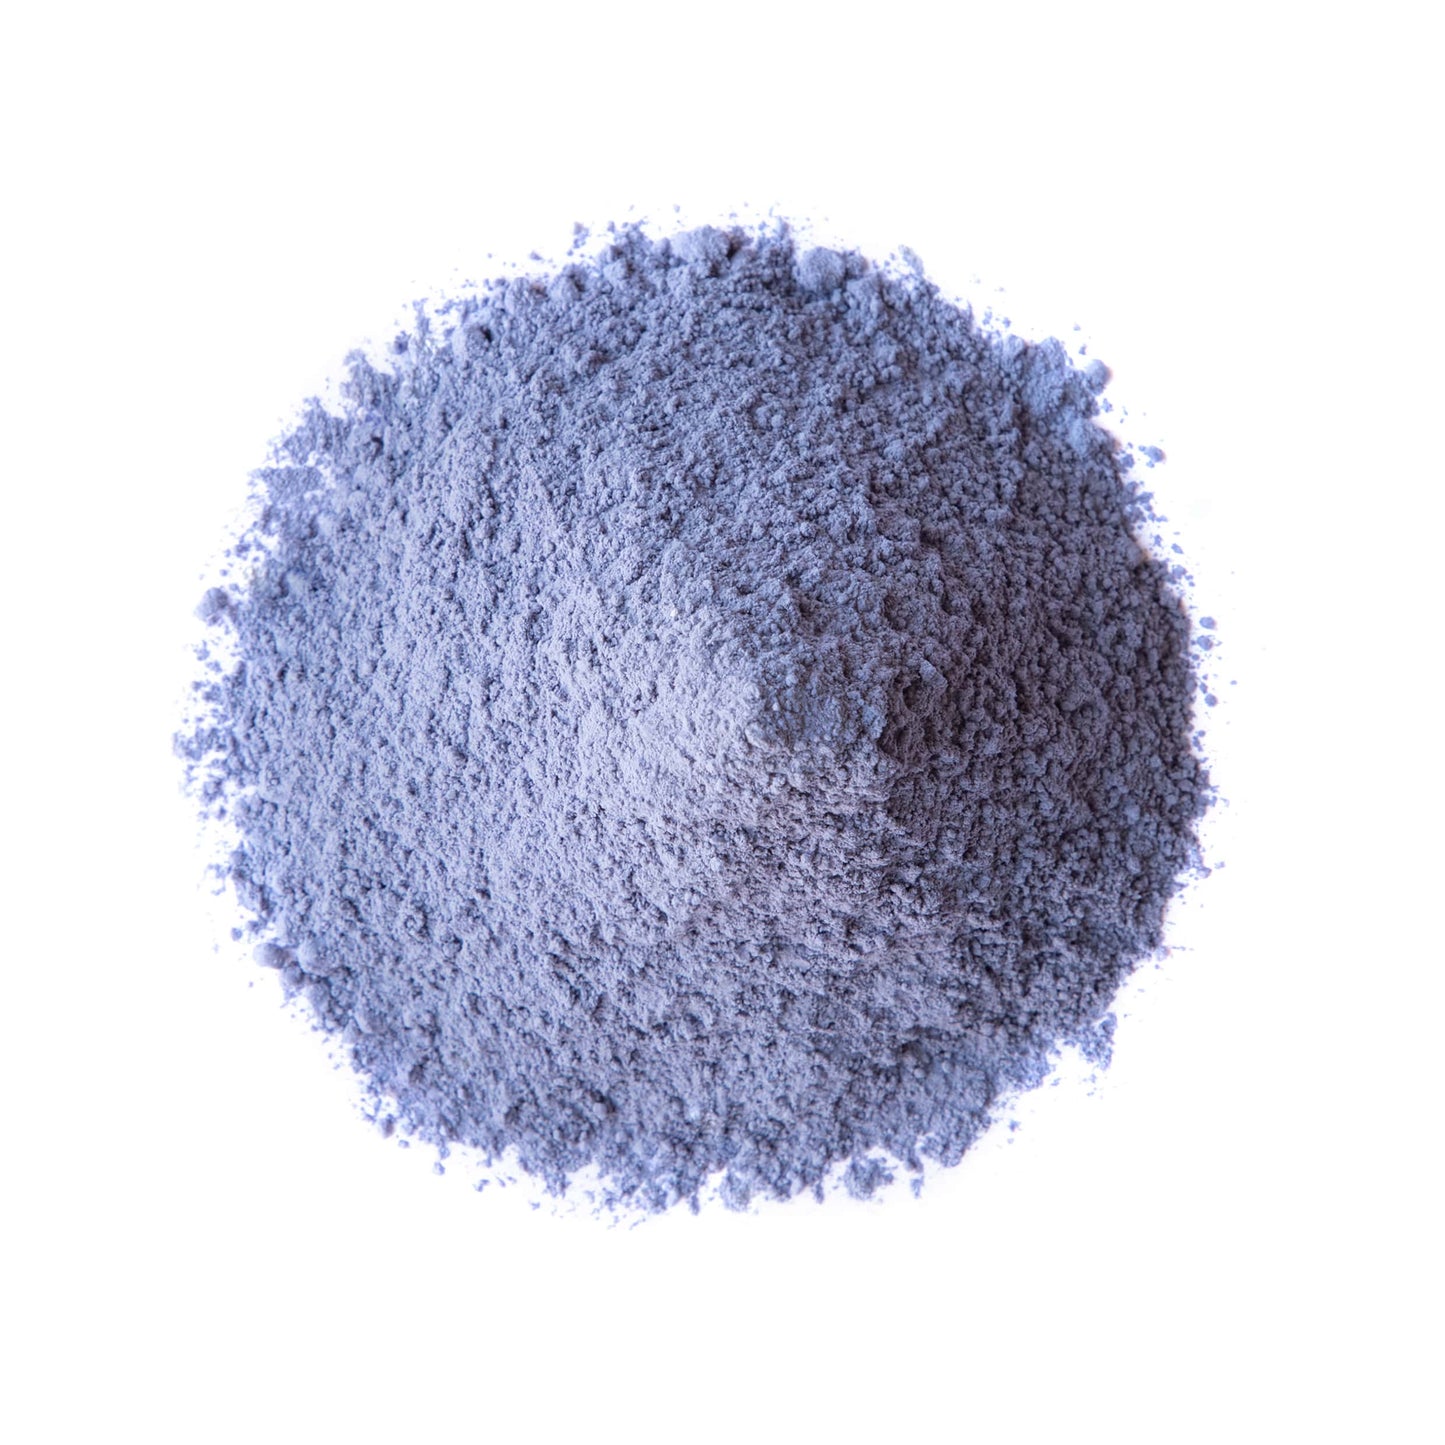 Organic Butterfly Pea Flower Powder — Non-GMO Blue Matcha, Pure, Vegan, Kosher, Ceremonial Grade, Adaptogenic Raw Culinary, Great for Tea, Smoothies, Drinks. Perfect as Food Coloring, Bulk